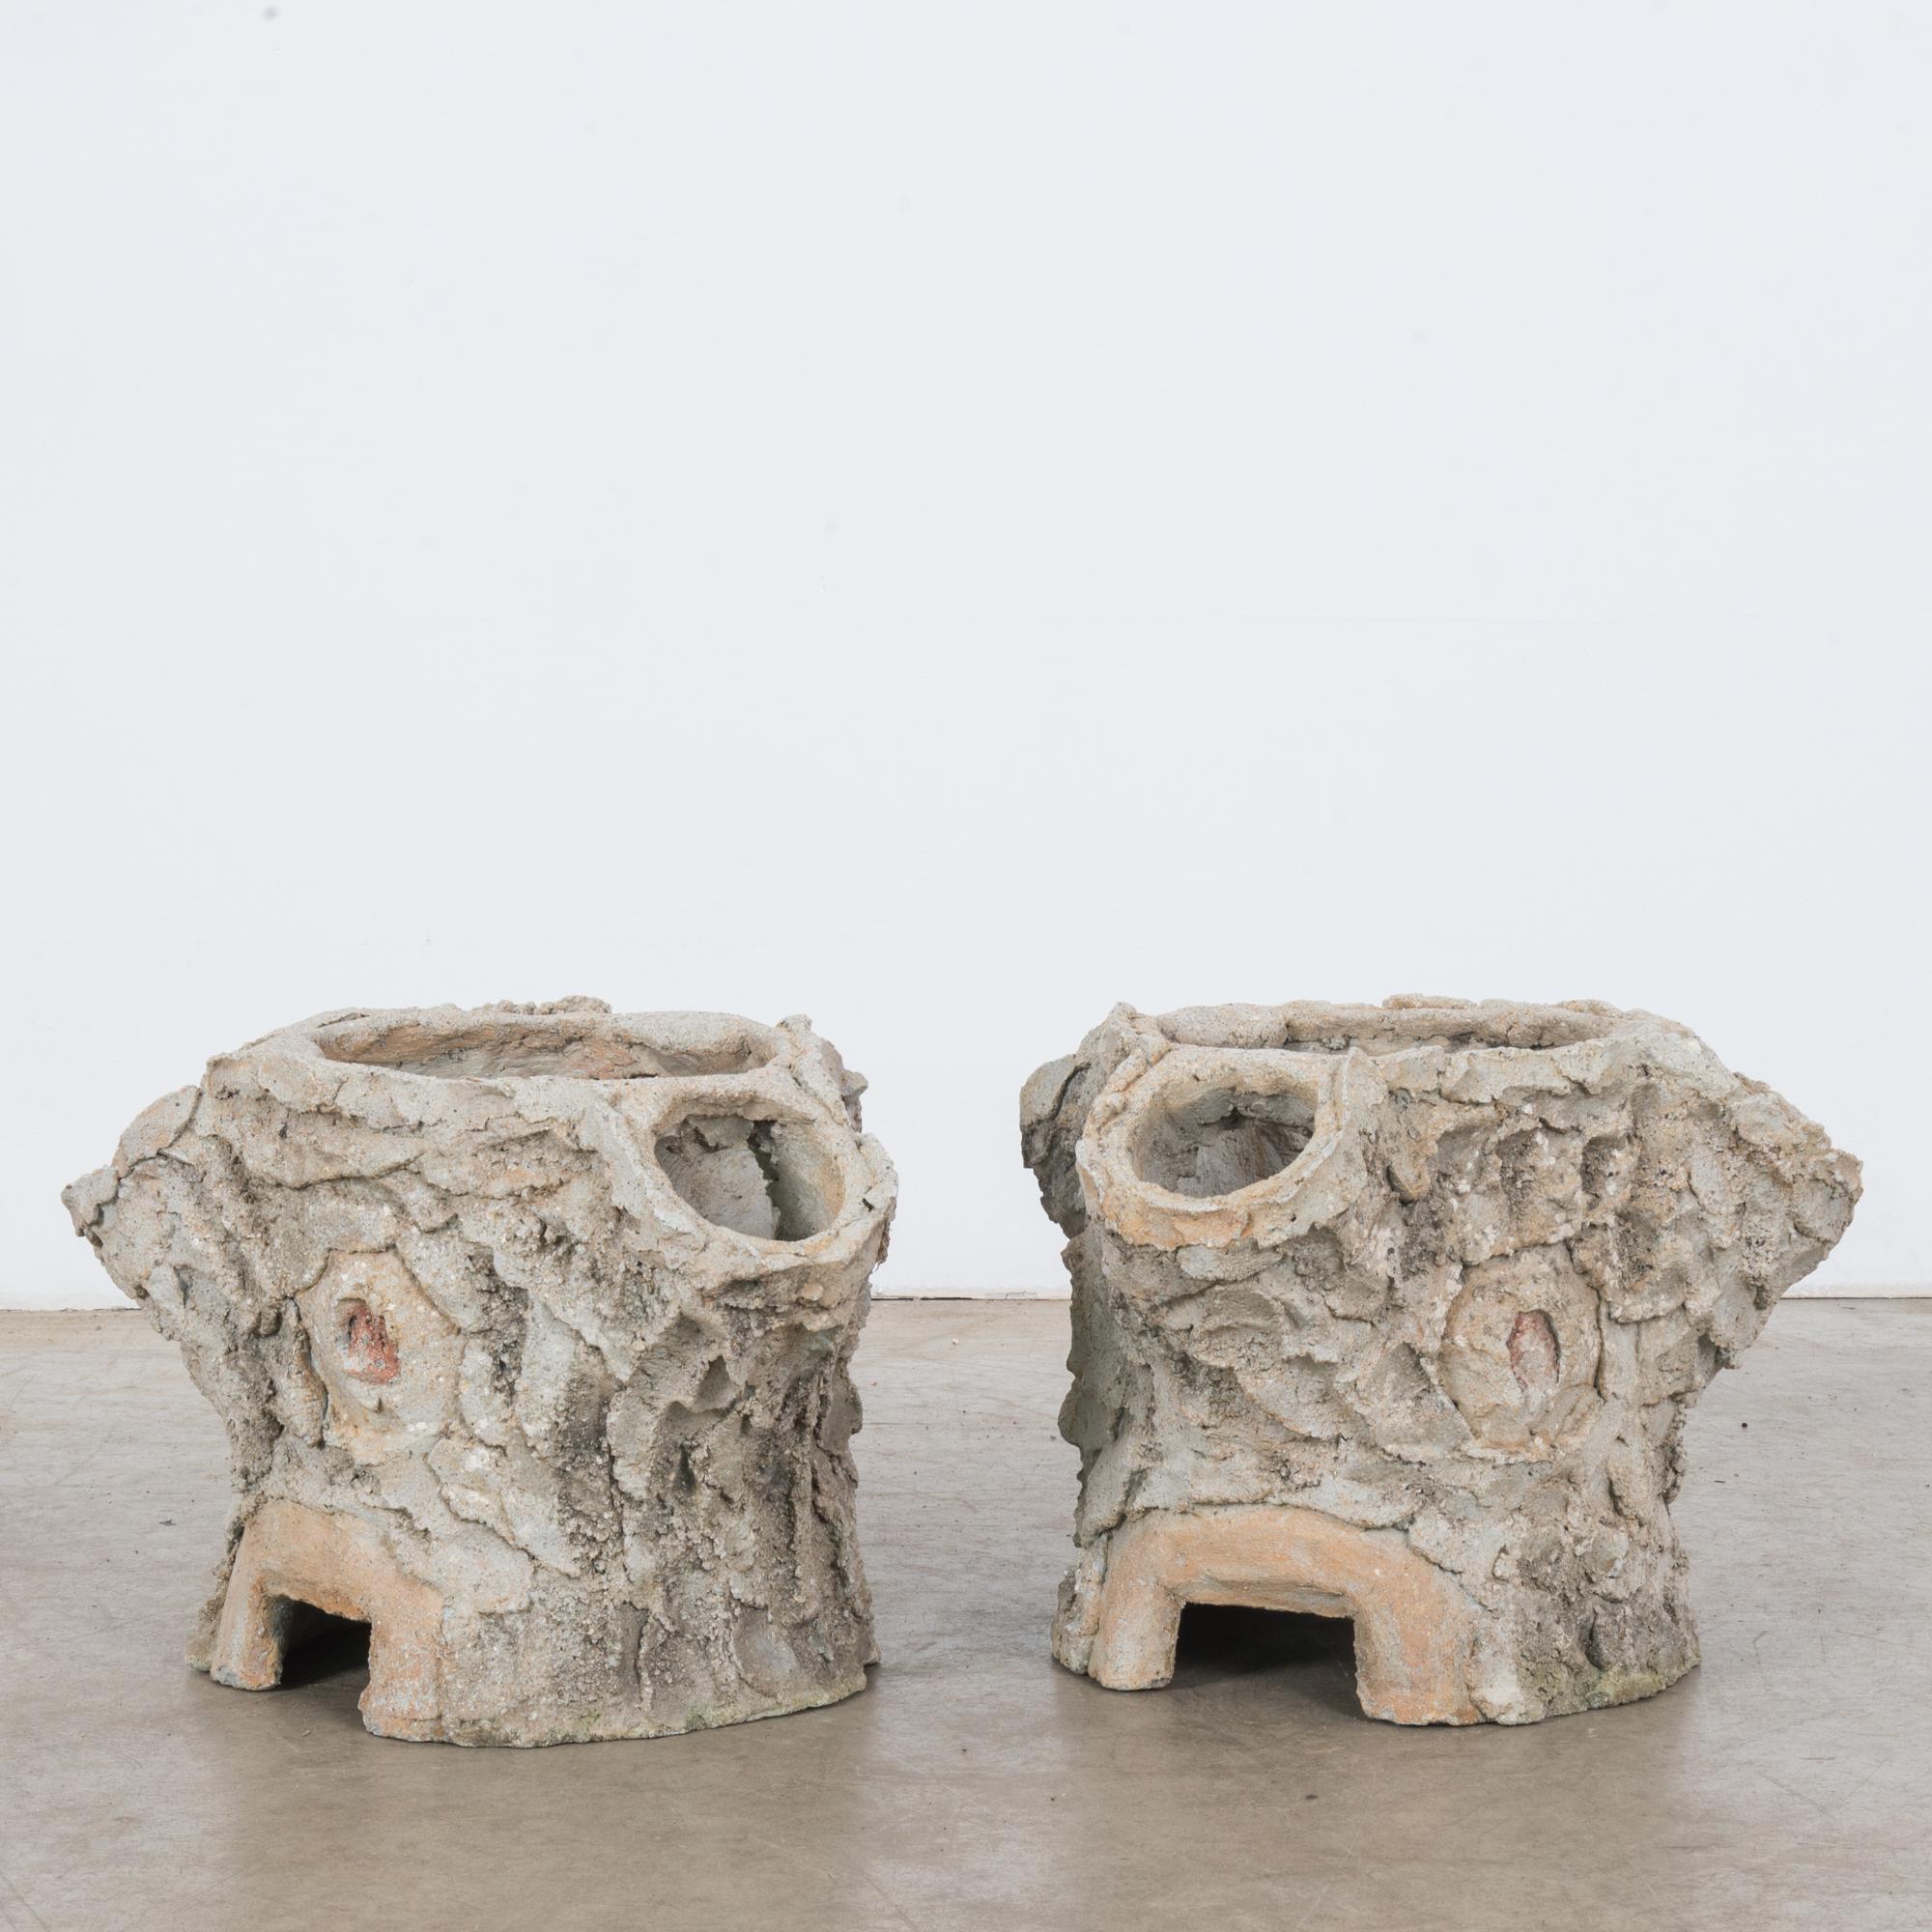 A pair of faux bois concrete planters from France, circa 1960. The form is organic, reminiscent of tree stumps. The rugged, textural application of concrete to the outer surface gives the impression of tree bark. Lively, rustic and nature-inspired,